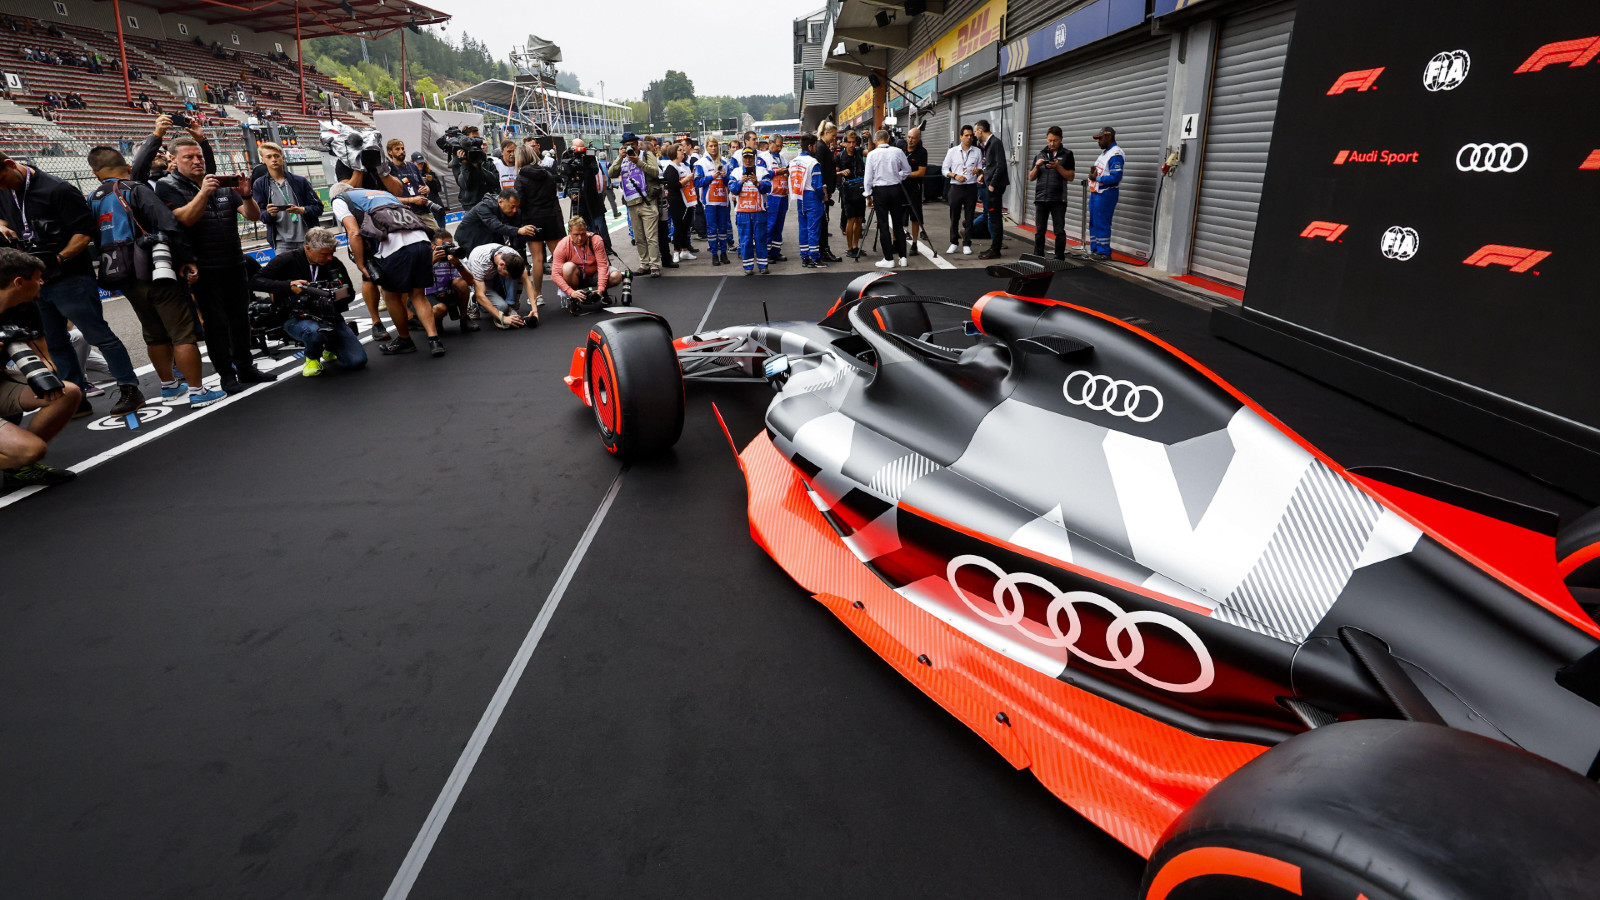 Audi car mock up is revealed at the Belgian Grand Prix. Spa-Francorchamps, August 2022.